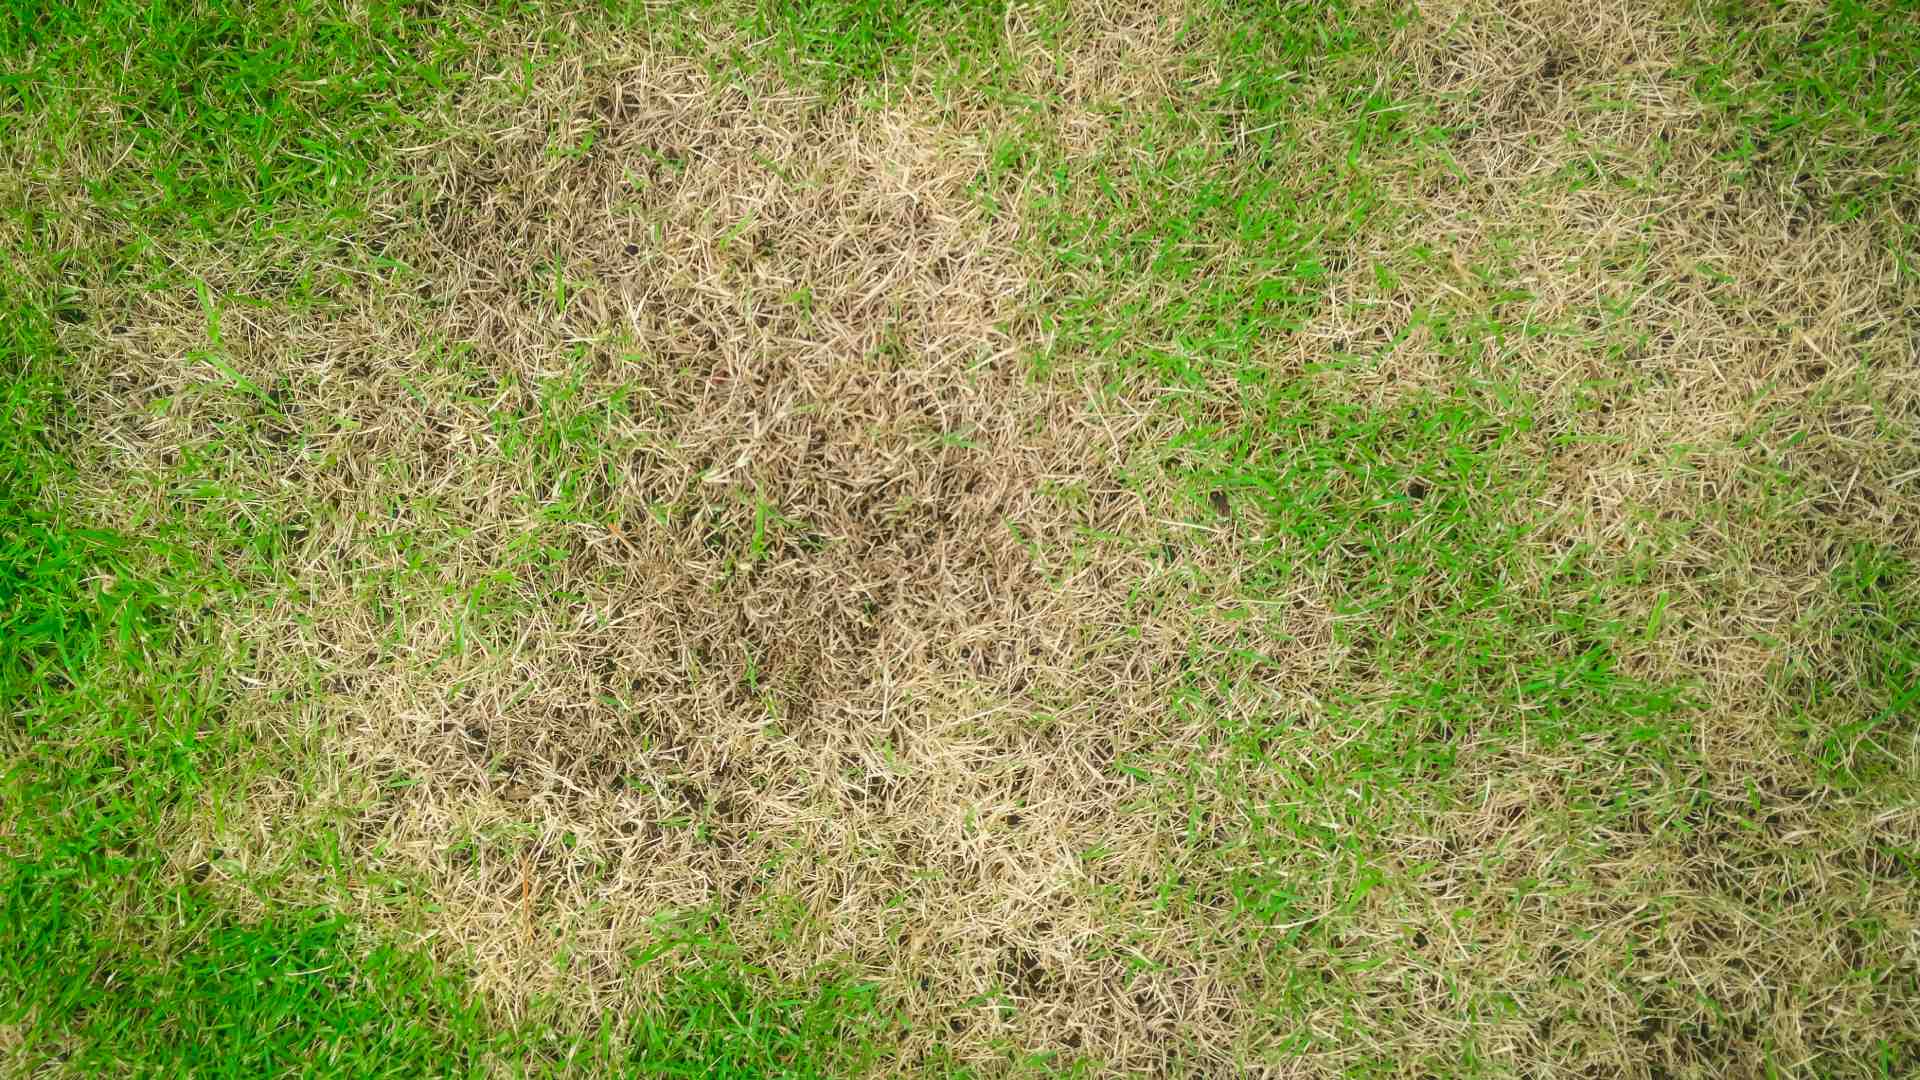 Brown patch lawn disease infected lawn in Watauga, TX.